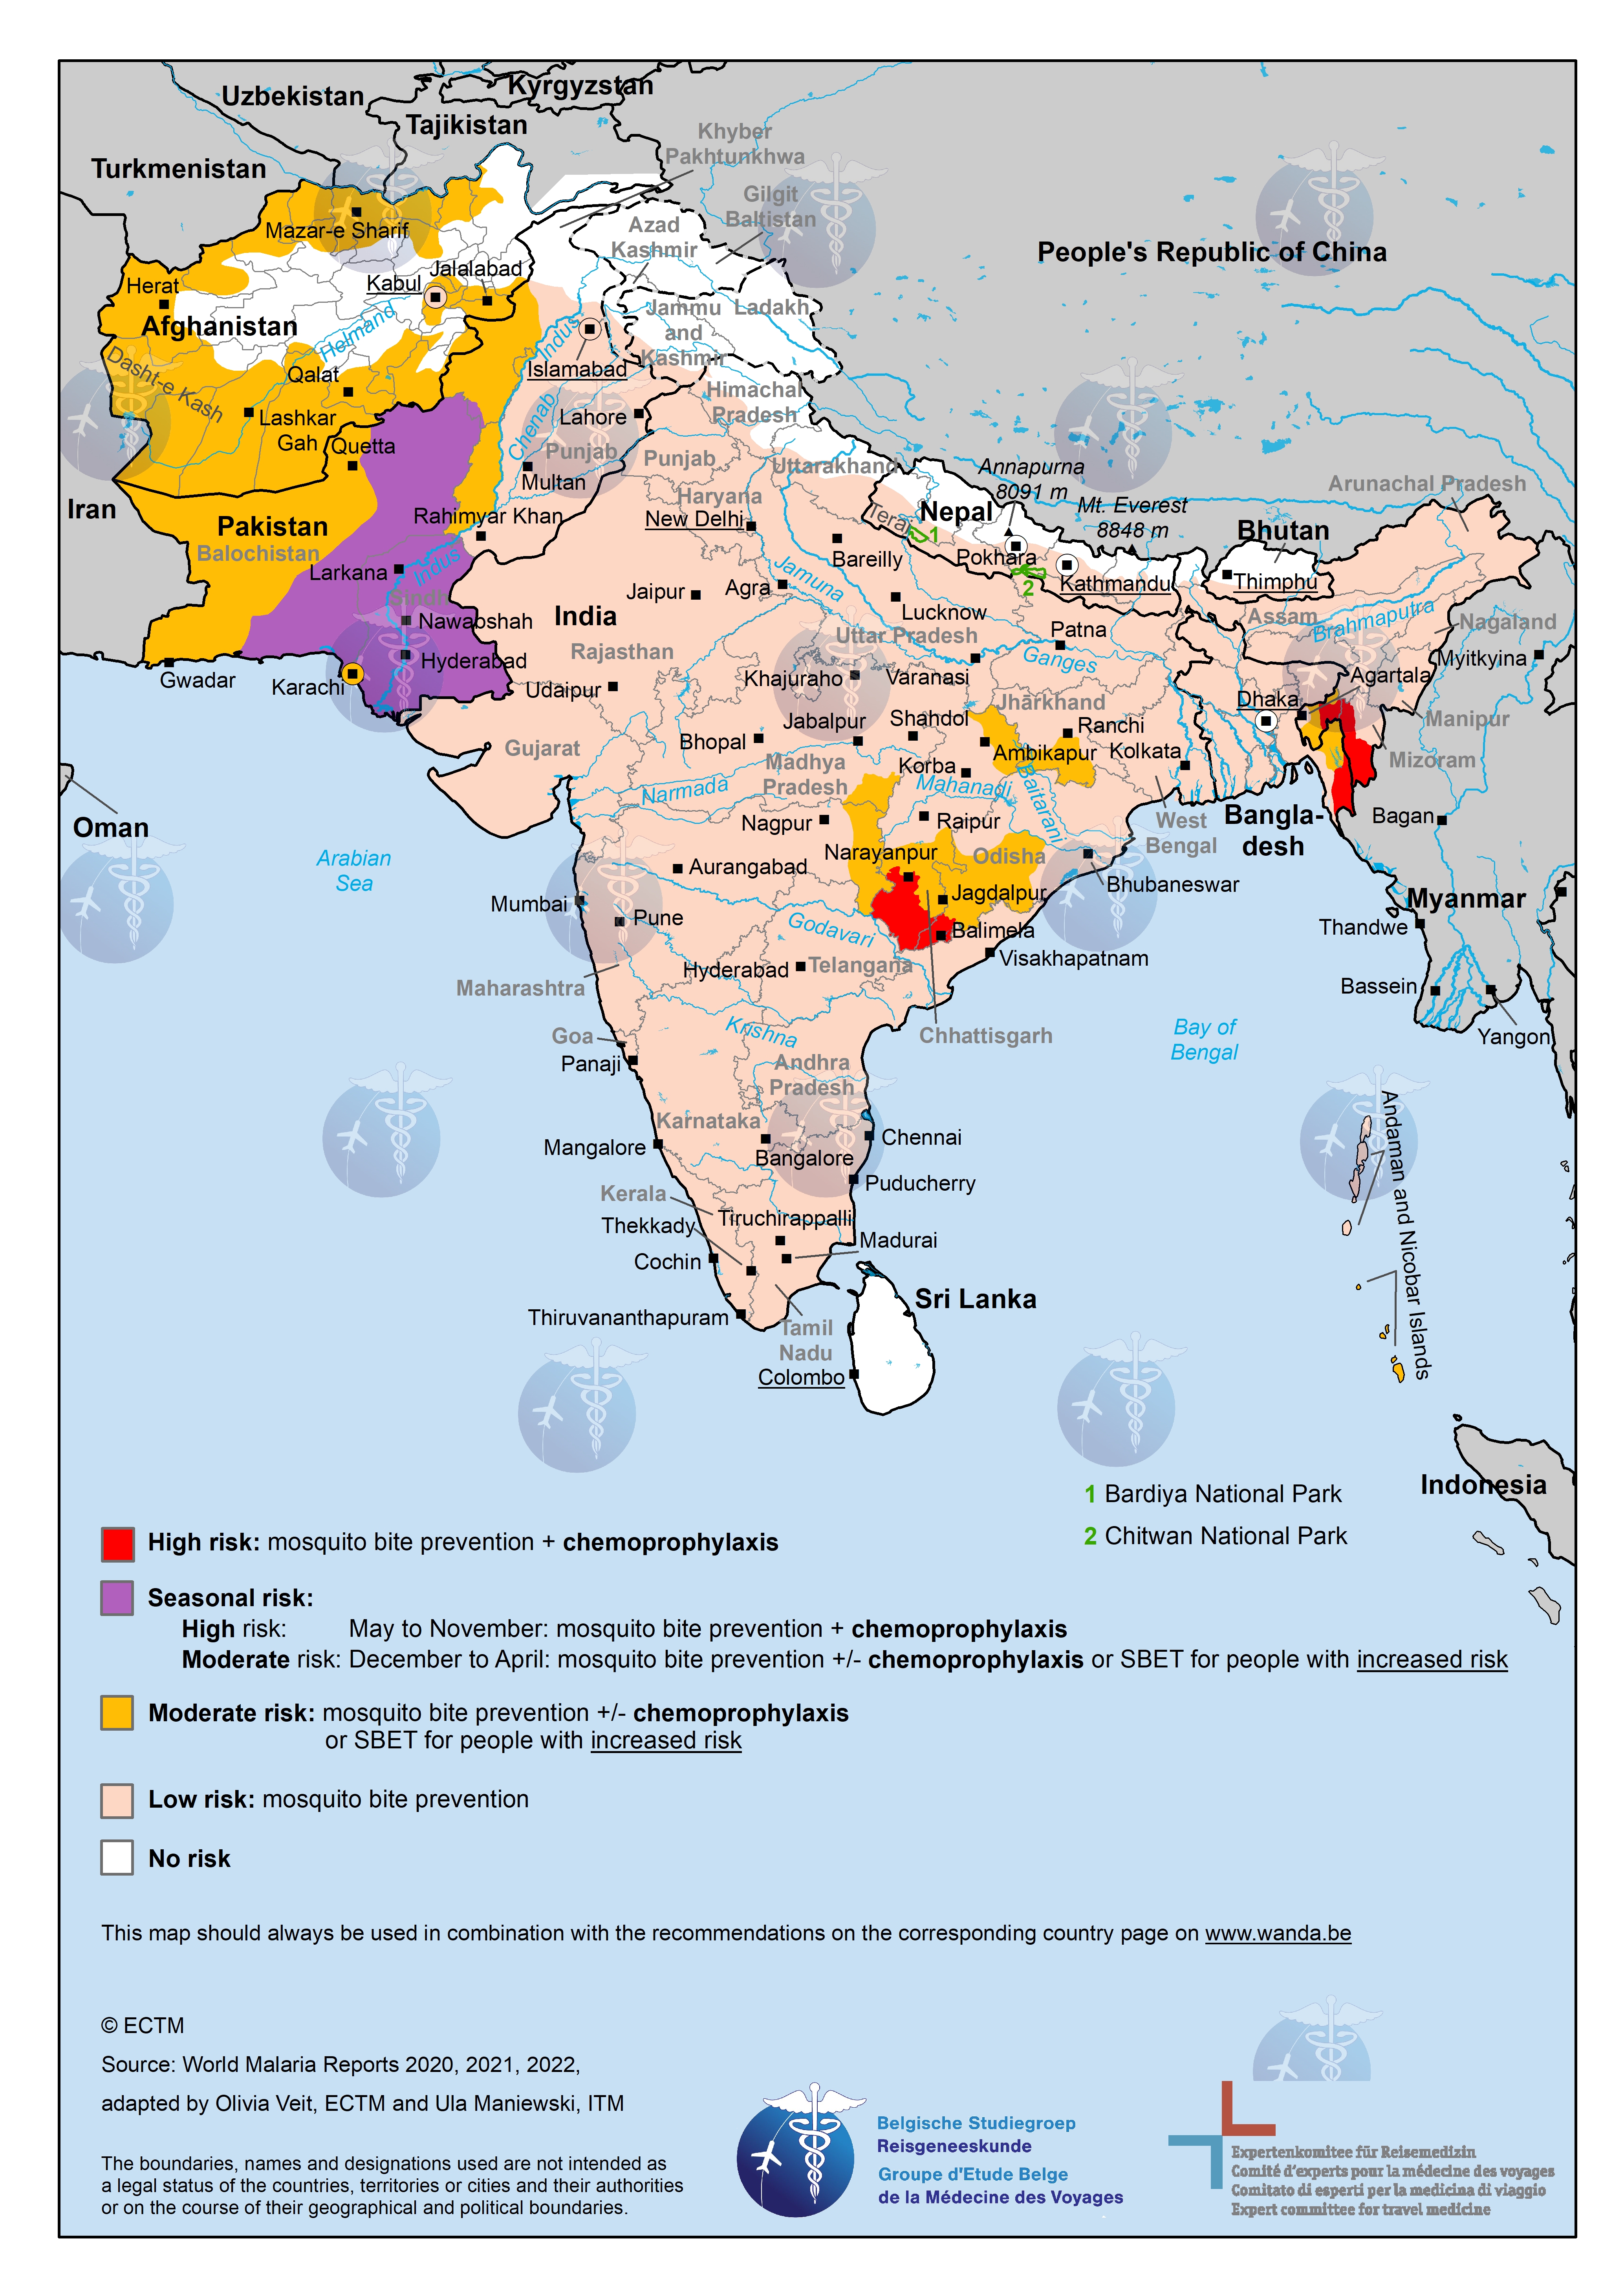 Map of South Asia with malaria risk areas